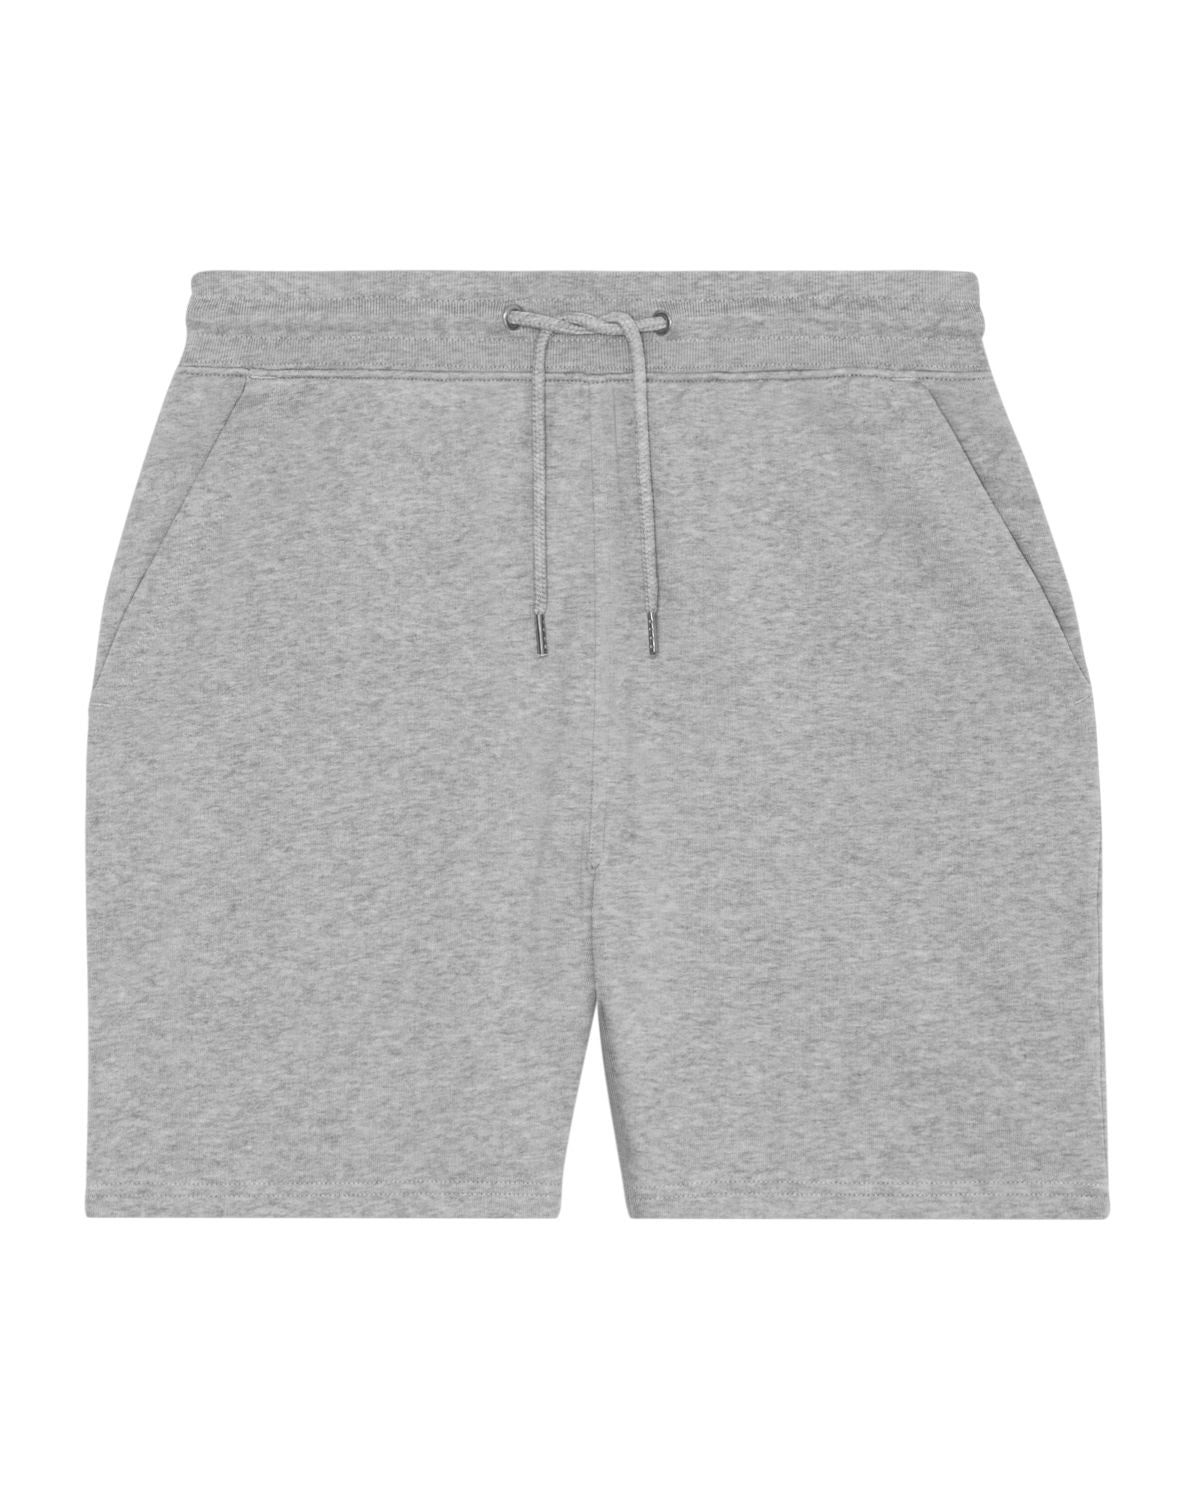 Customize your own sustainable Shorts made of 85% GOTS-certified organic cotton